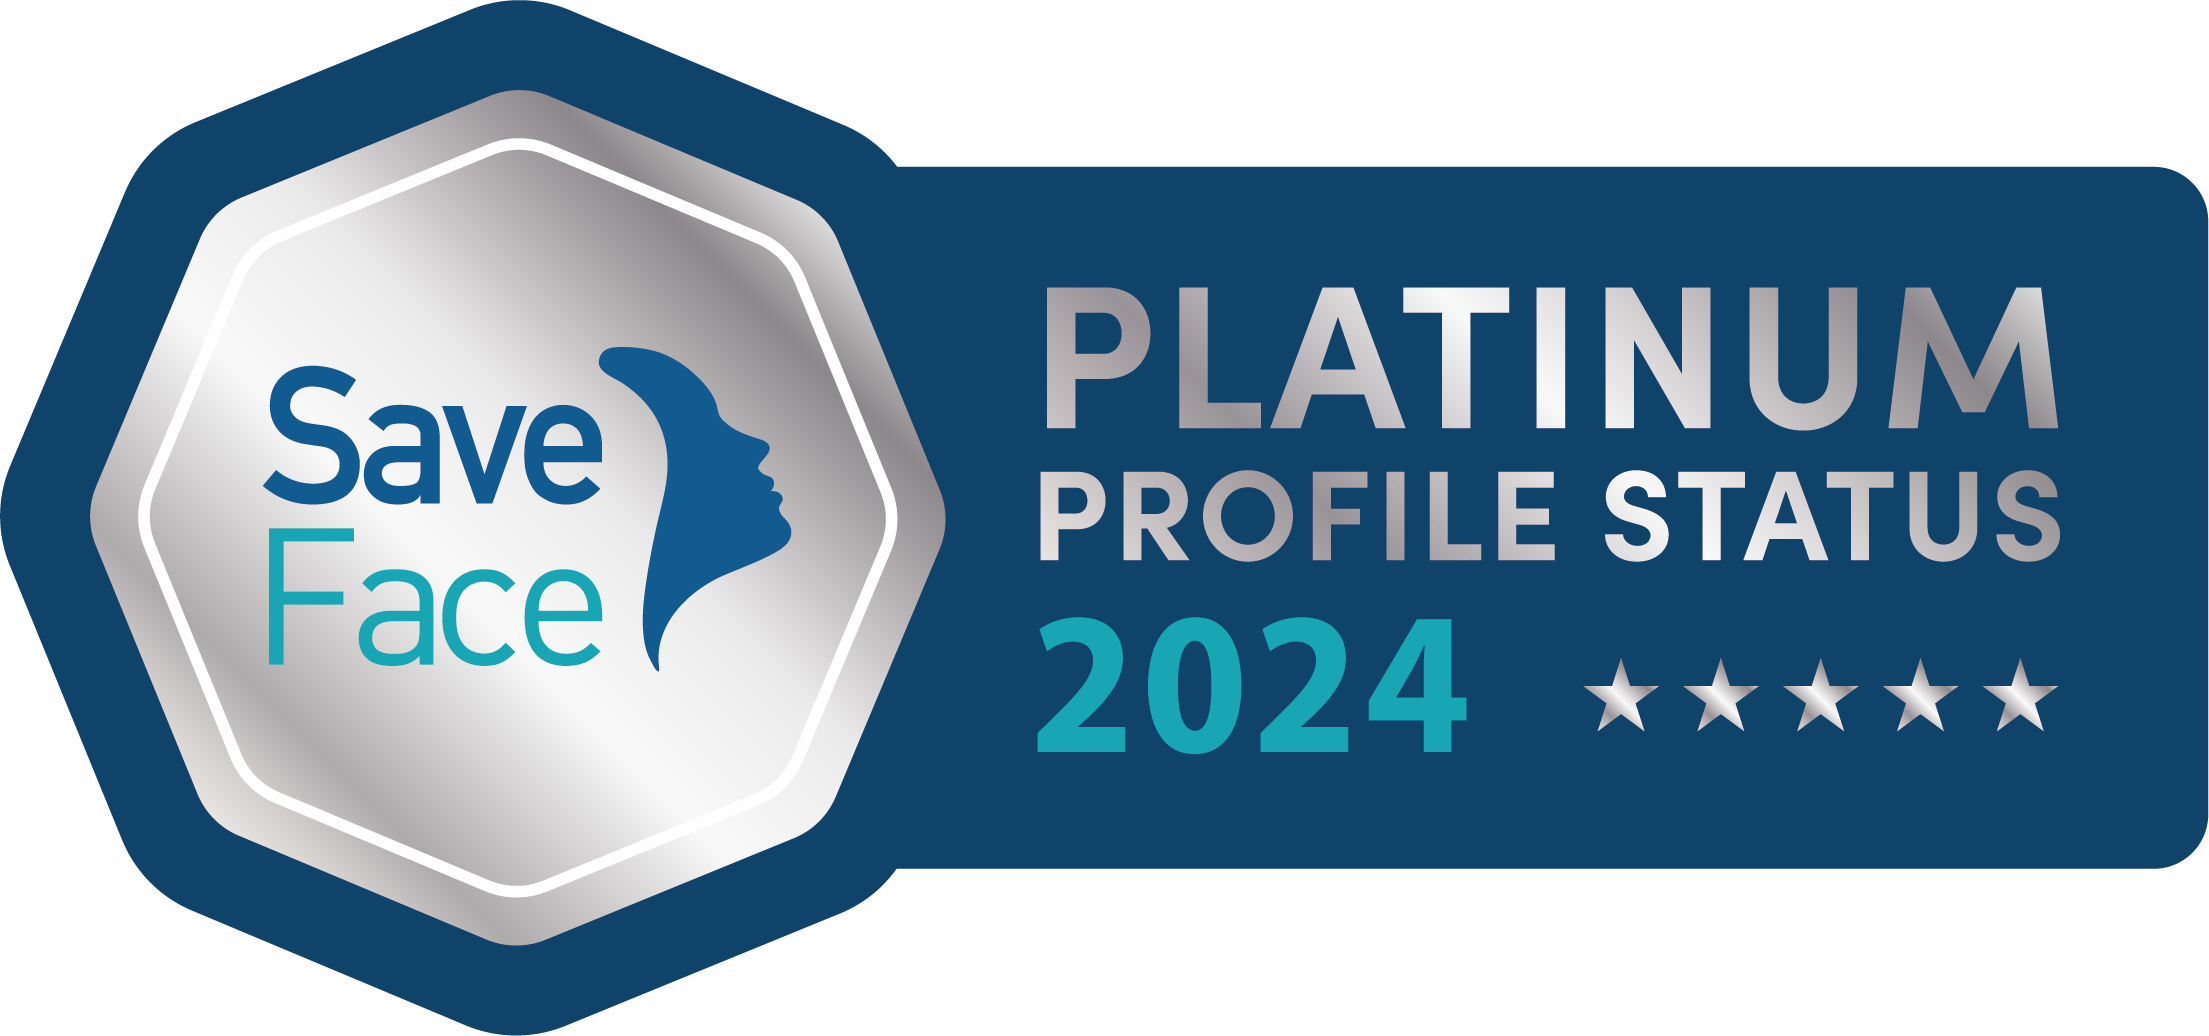 Very Proud to be awarded the Platinum Profile Status